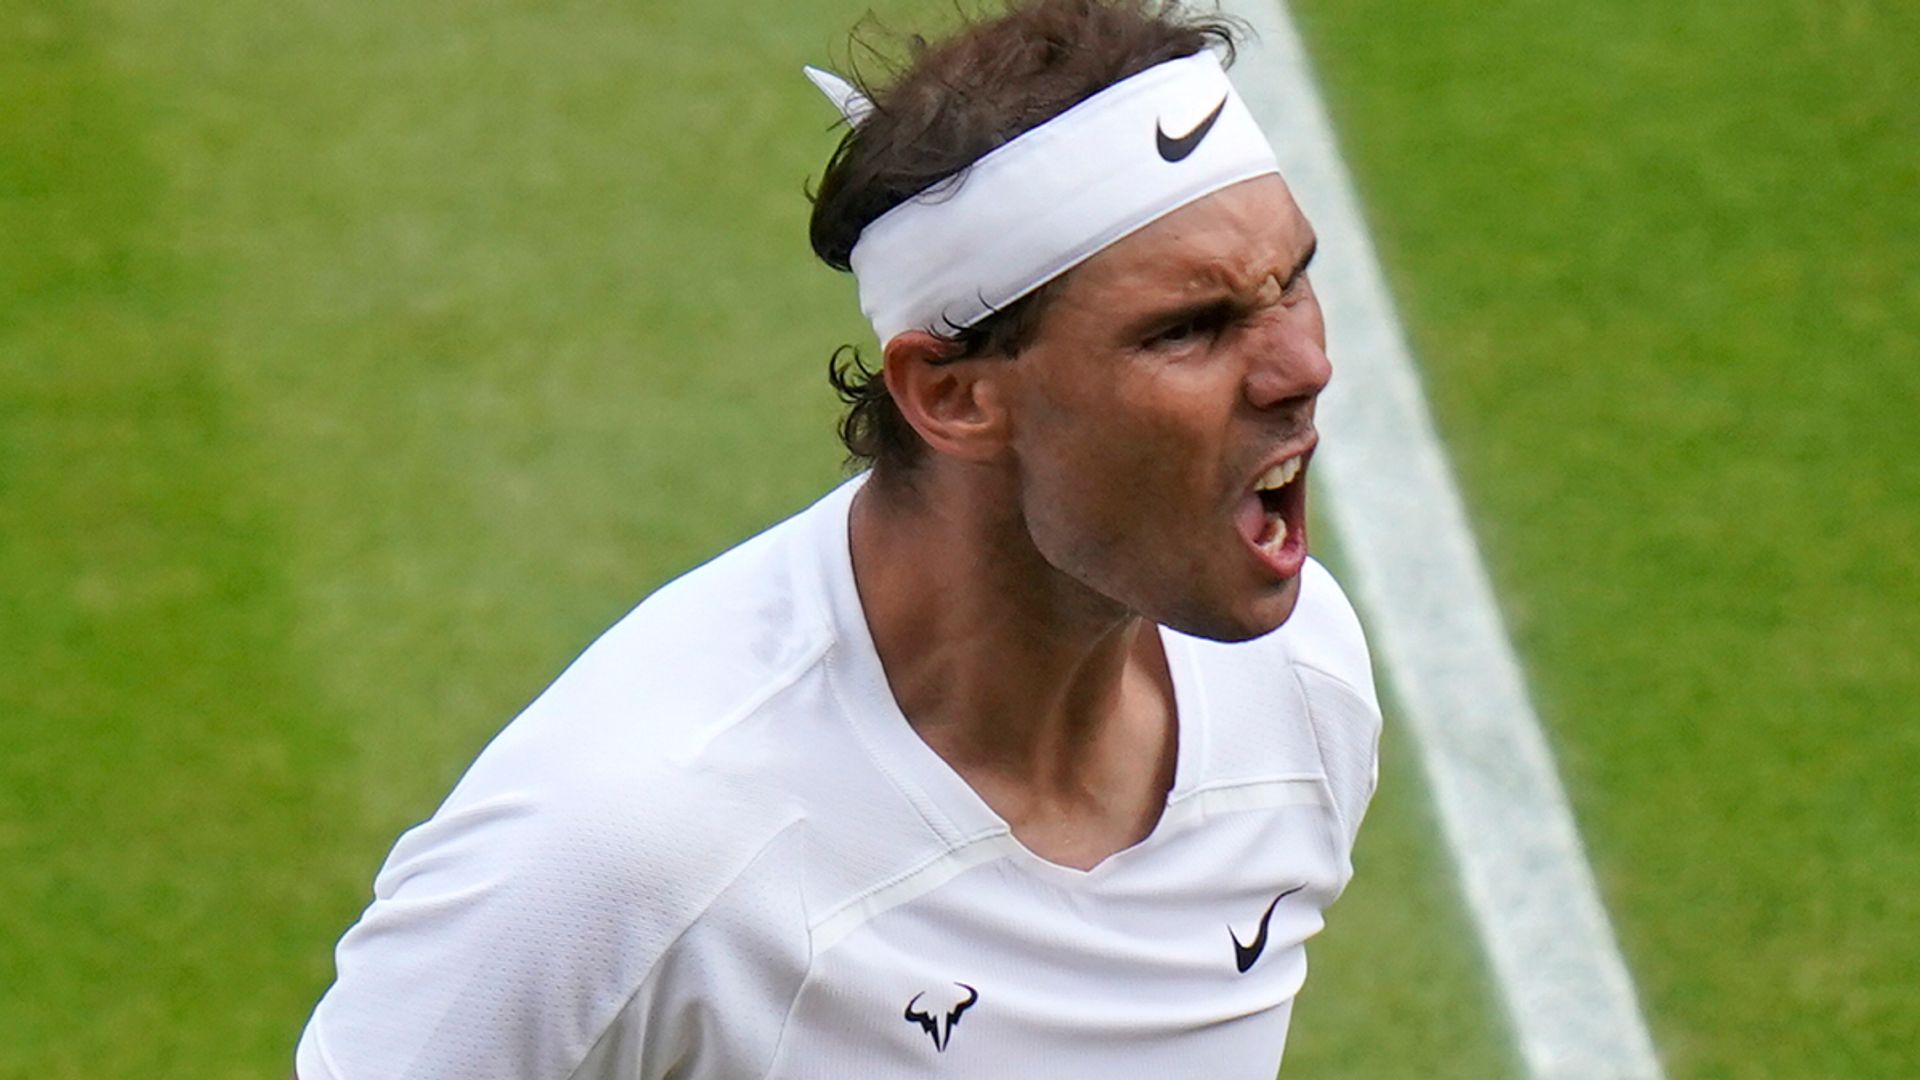 Nadal overcomes damage to beat Fritz in five-set Wimbledon thrillerSkySports | Information